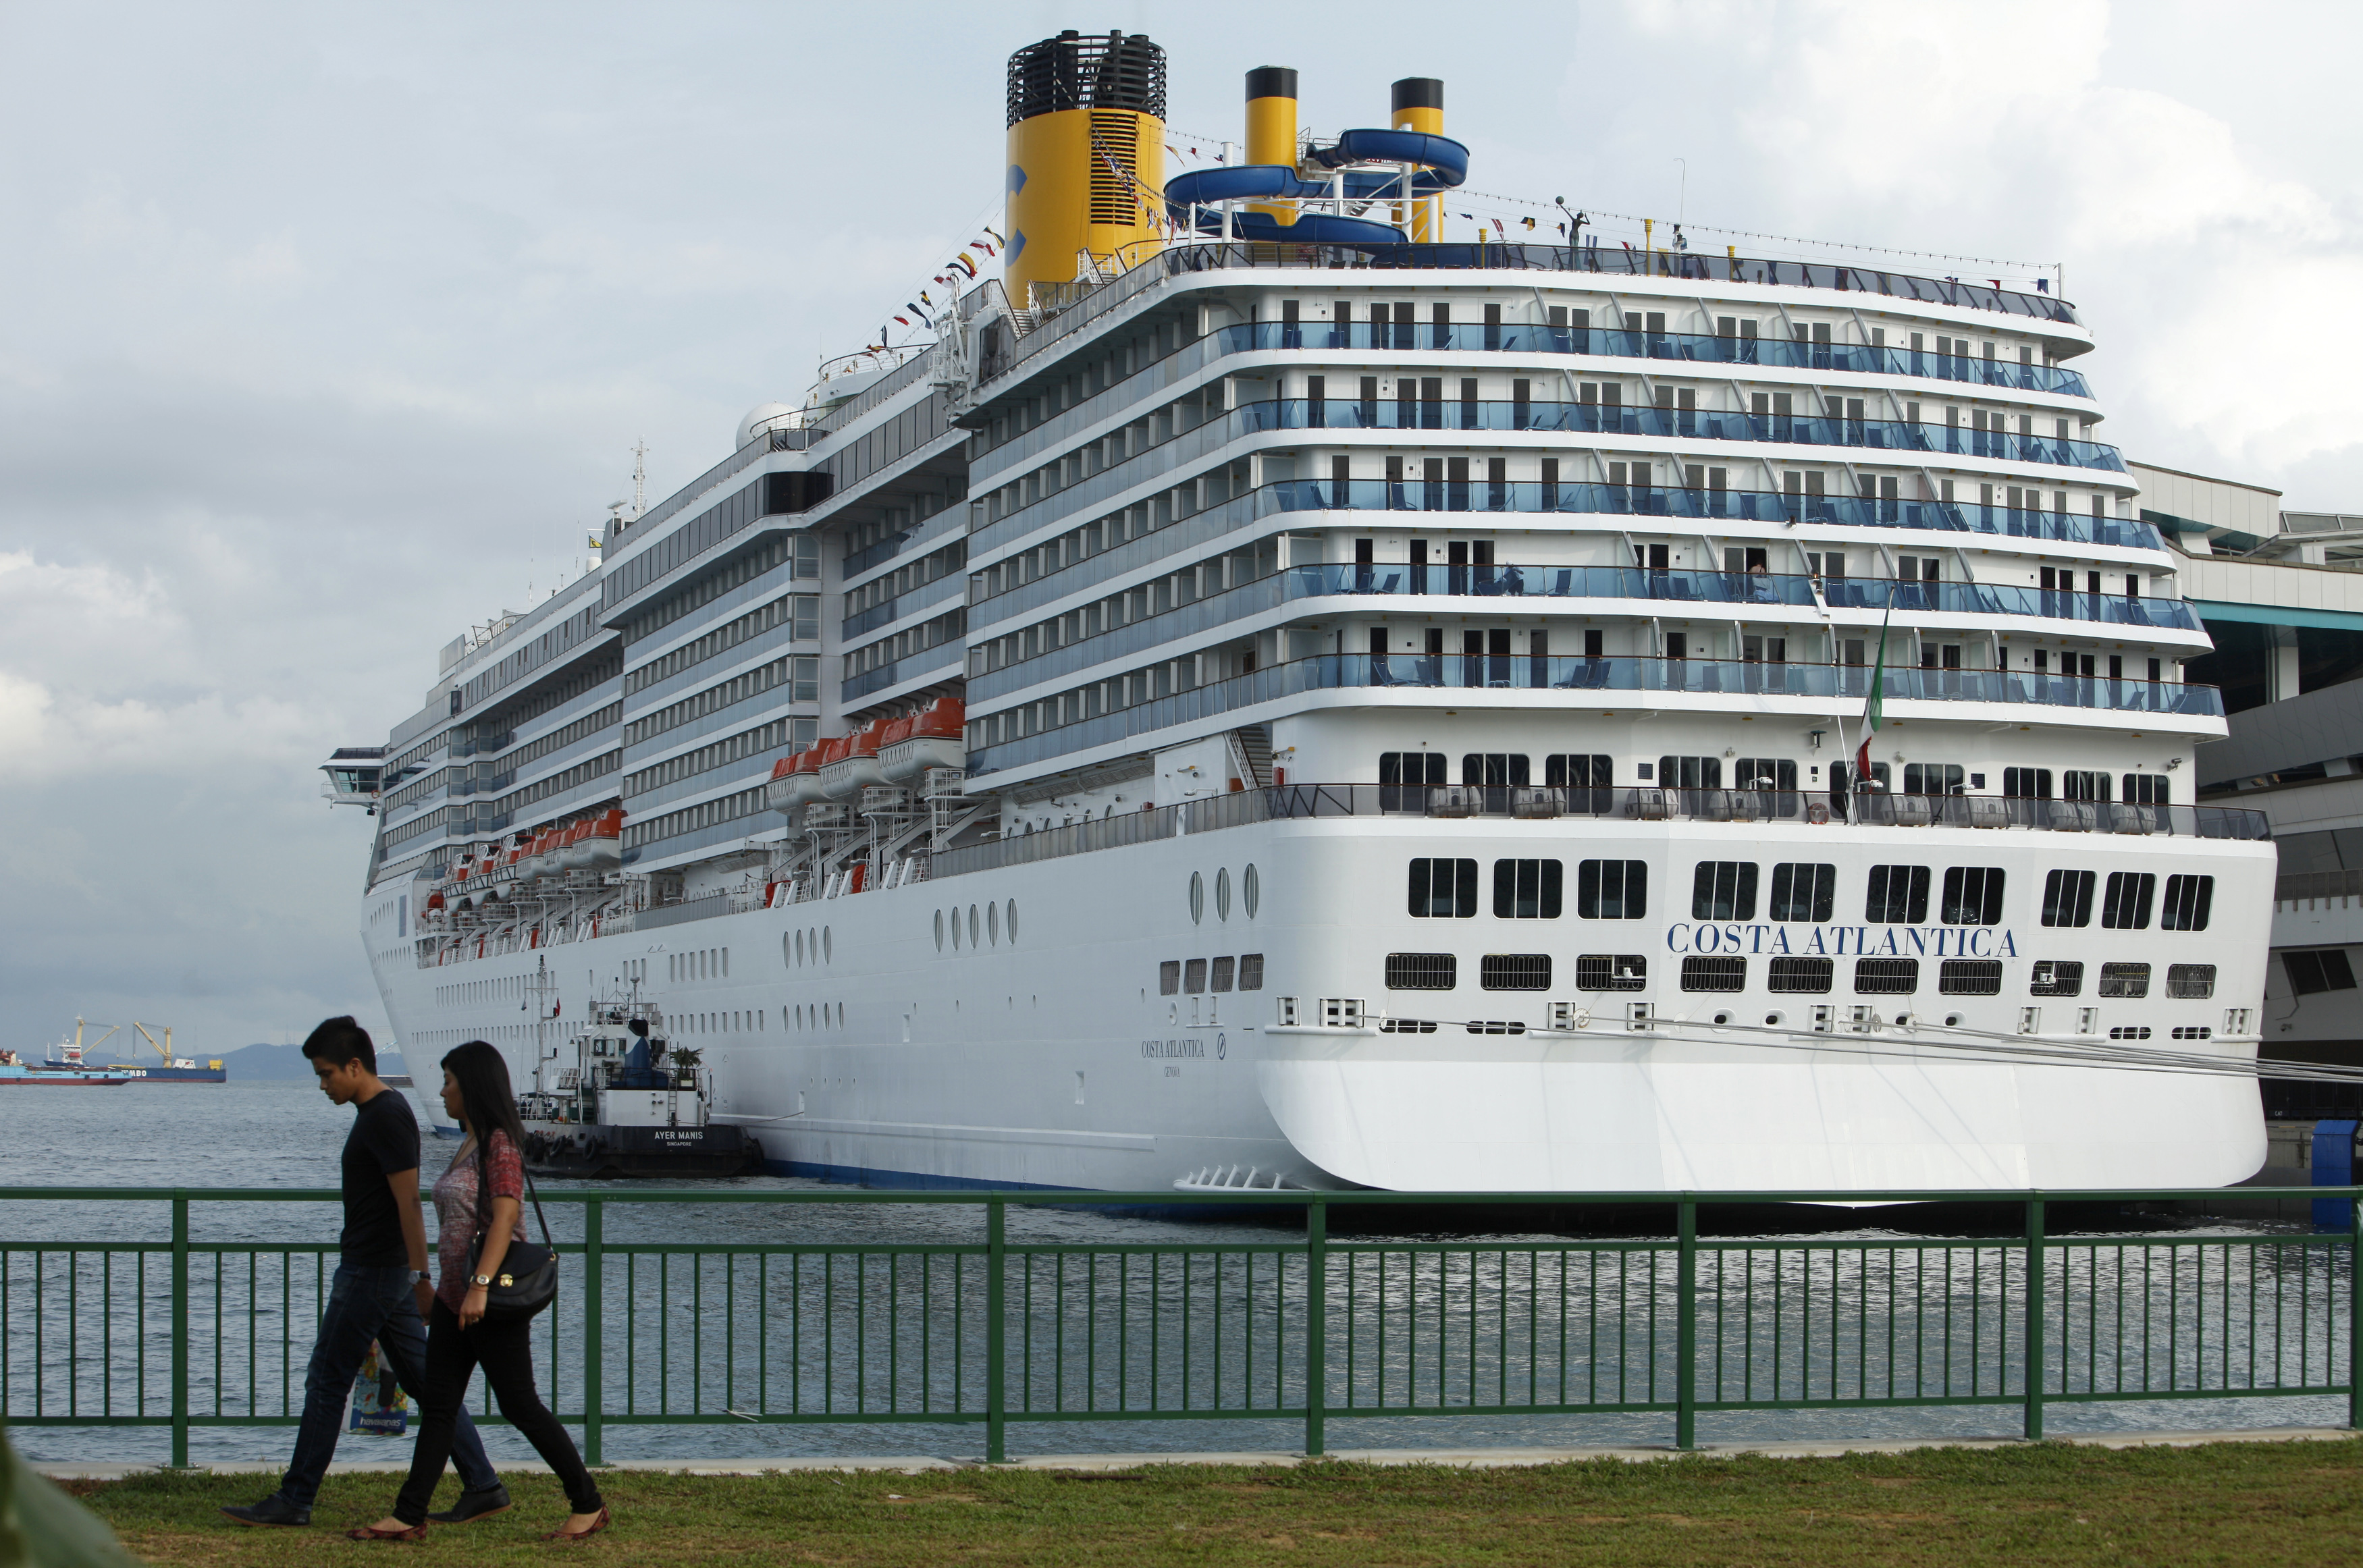 A couple walks past Carnival Asia's Costa Atlantica during its maiden call at the Marina Bay Cruise Center in Singapore